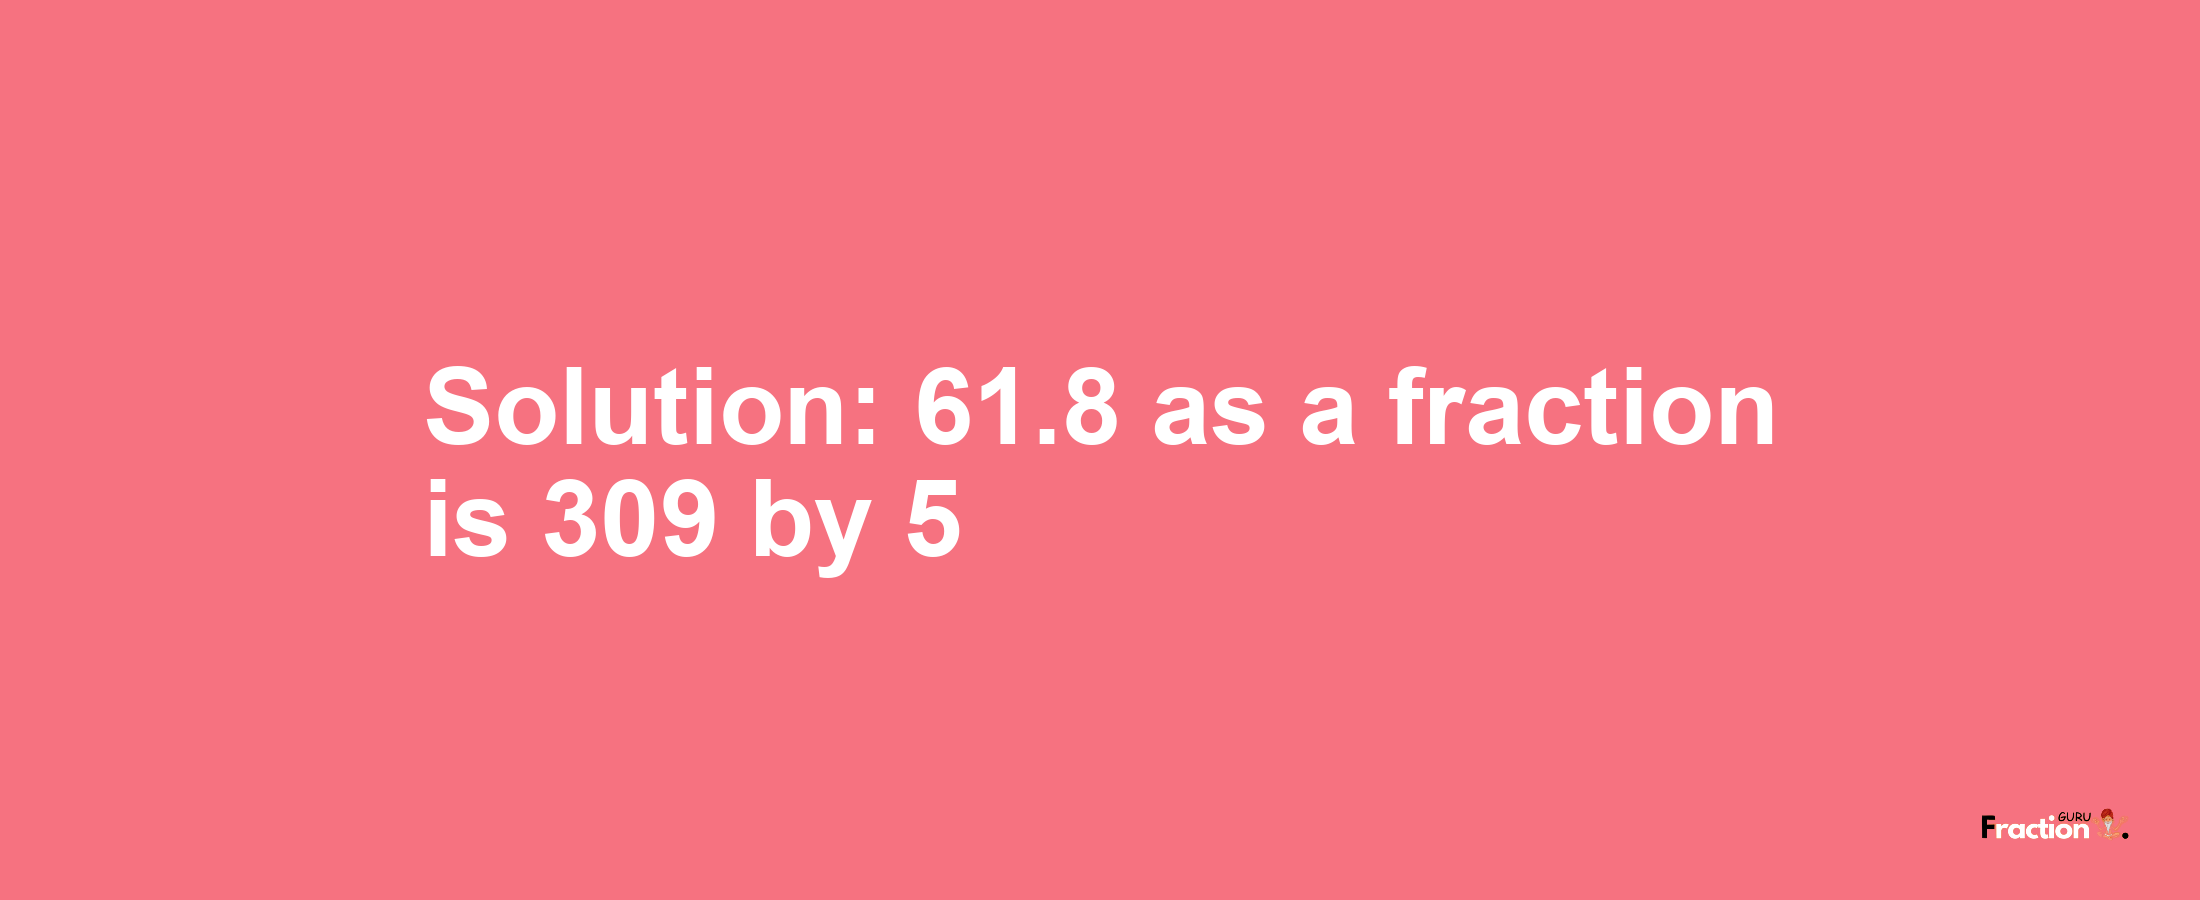 Solution:61.8 as a fraction is 309/5